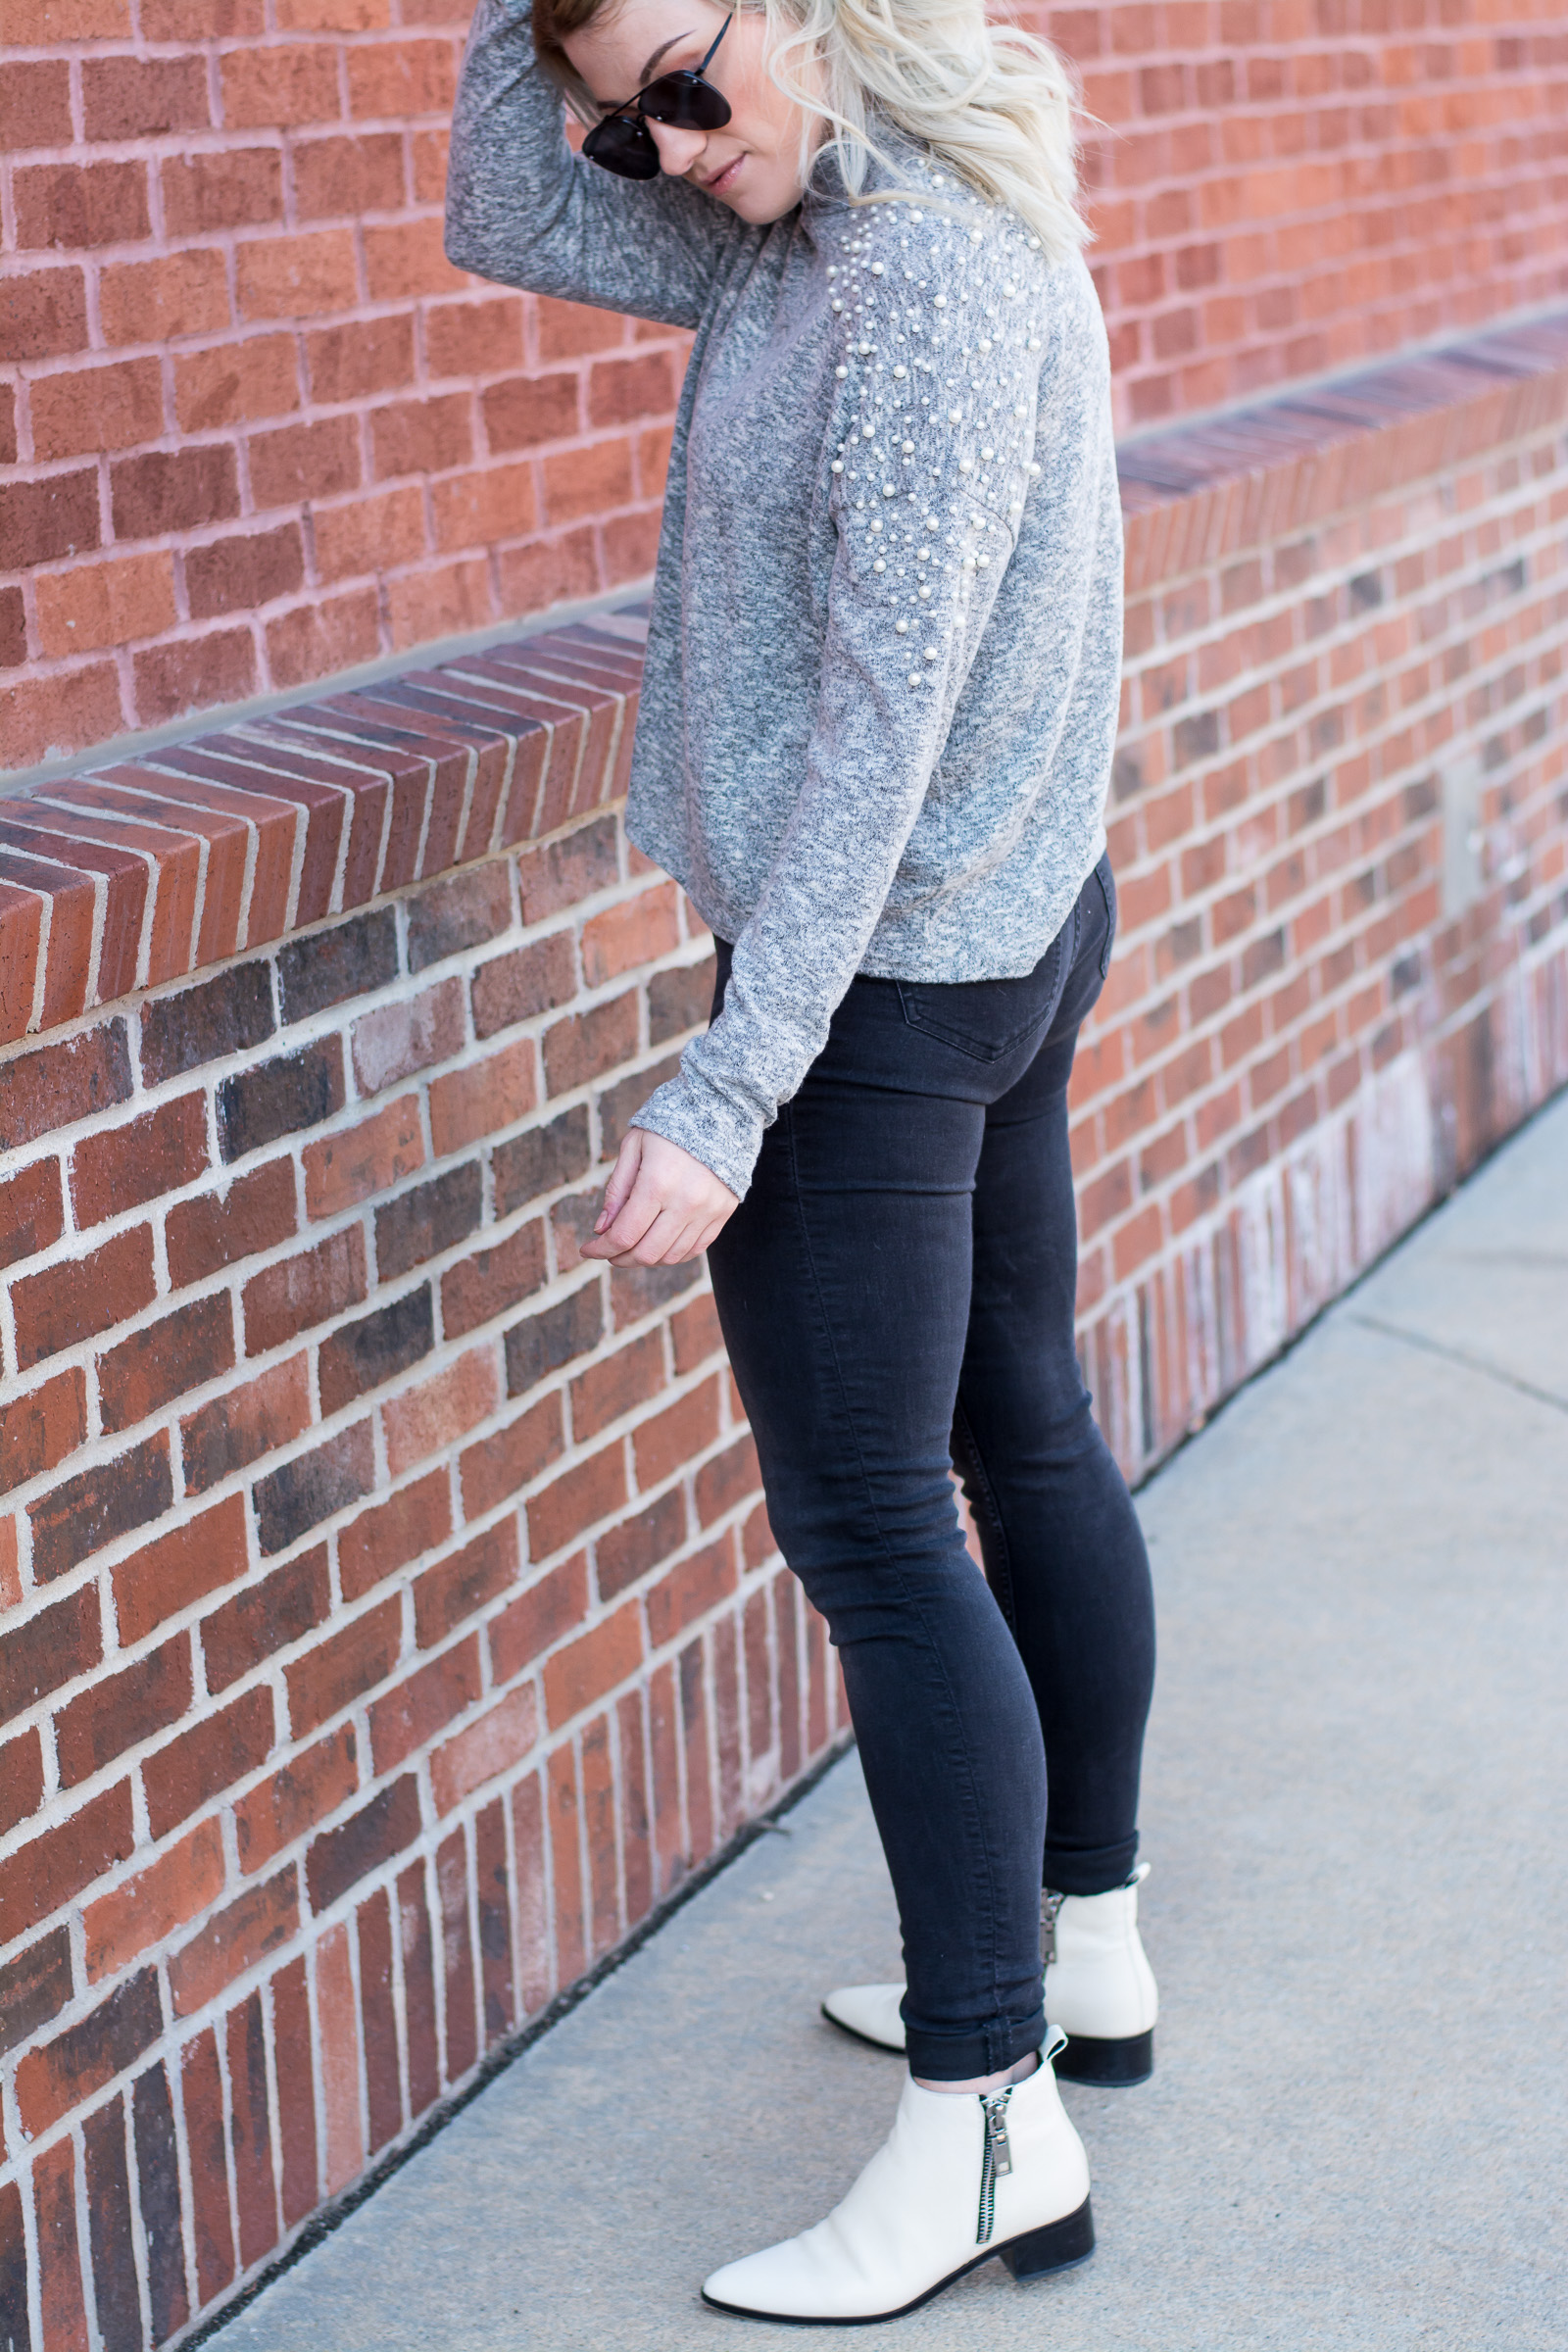 Pearl Sweater with White Booties. | Ashley from LSR